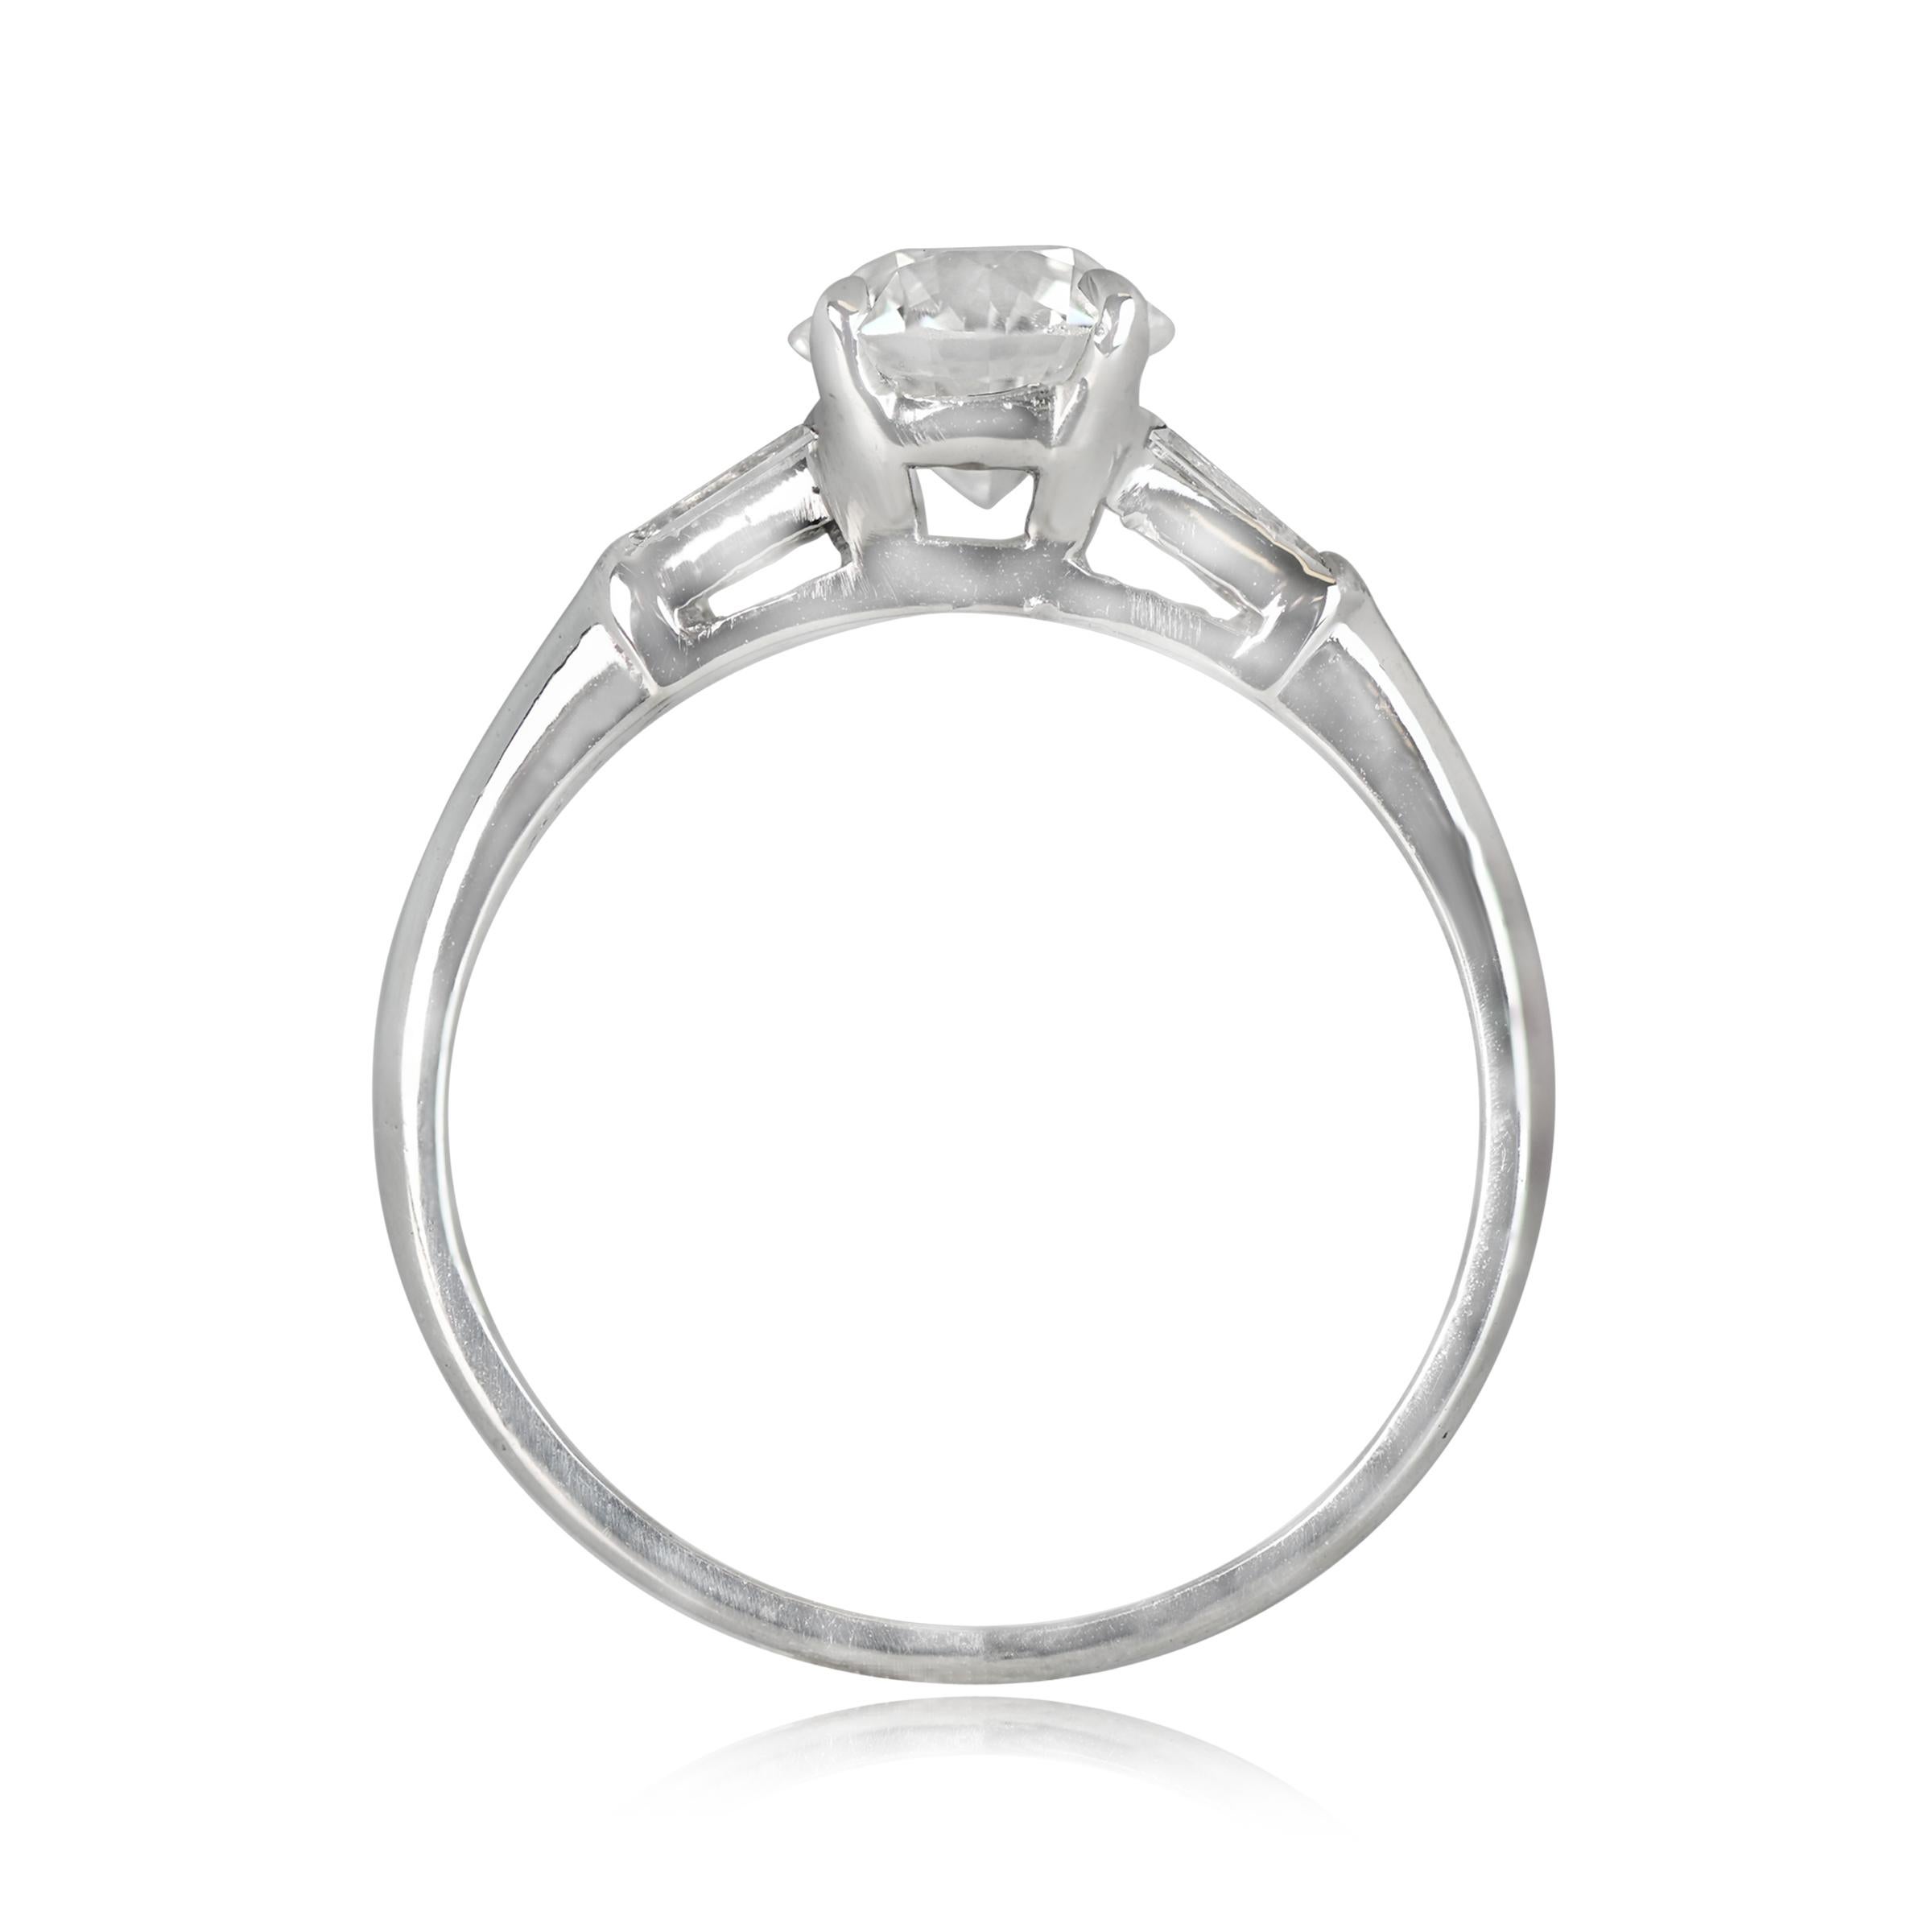 Vintage GIA 1.08ct Old European Cut Diamond Engagement Ring, Platinum In Excellent Condition For Sale In New York, NY